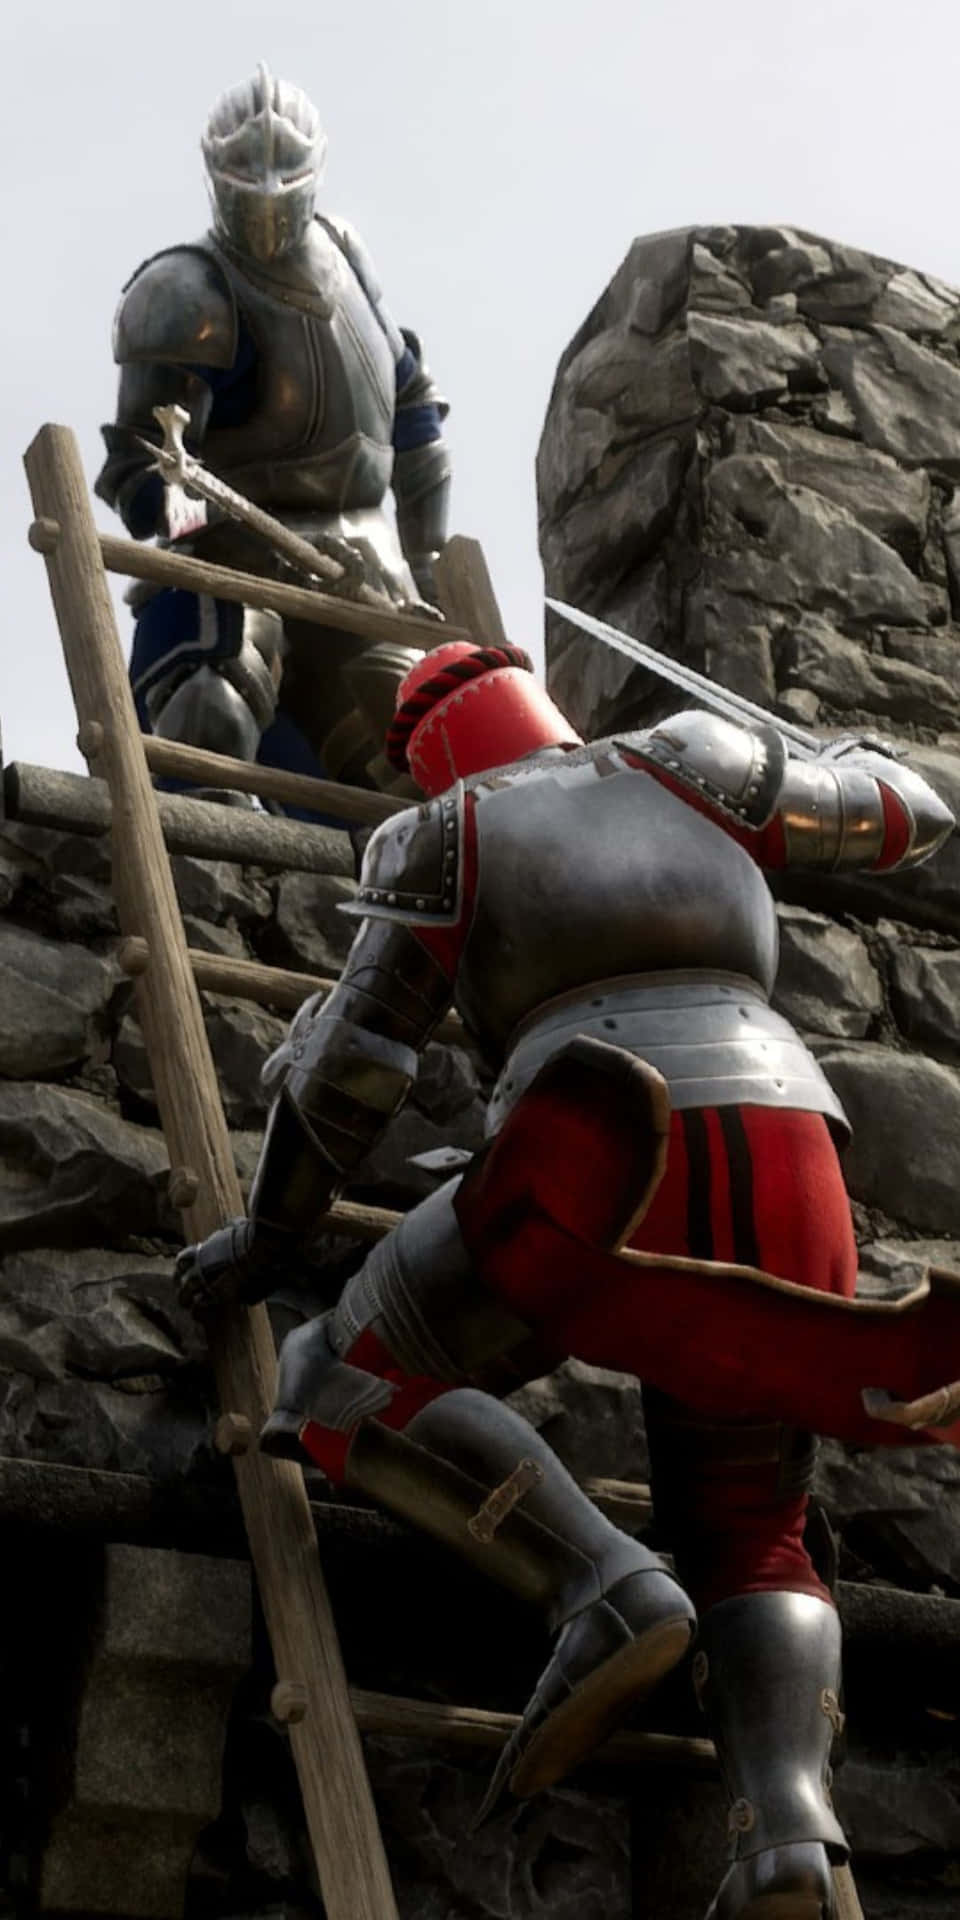 Feel the intensity of the mordhau battlefield with the Pixel 3